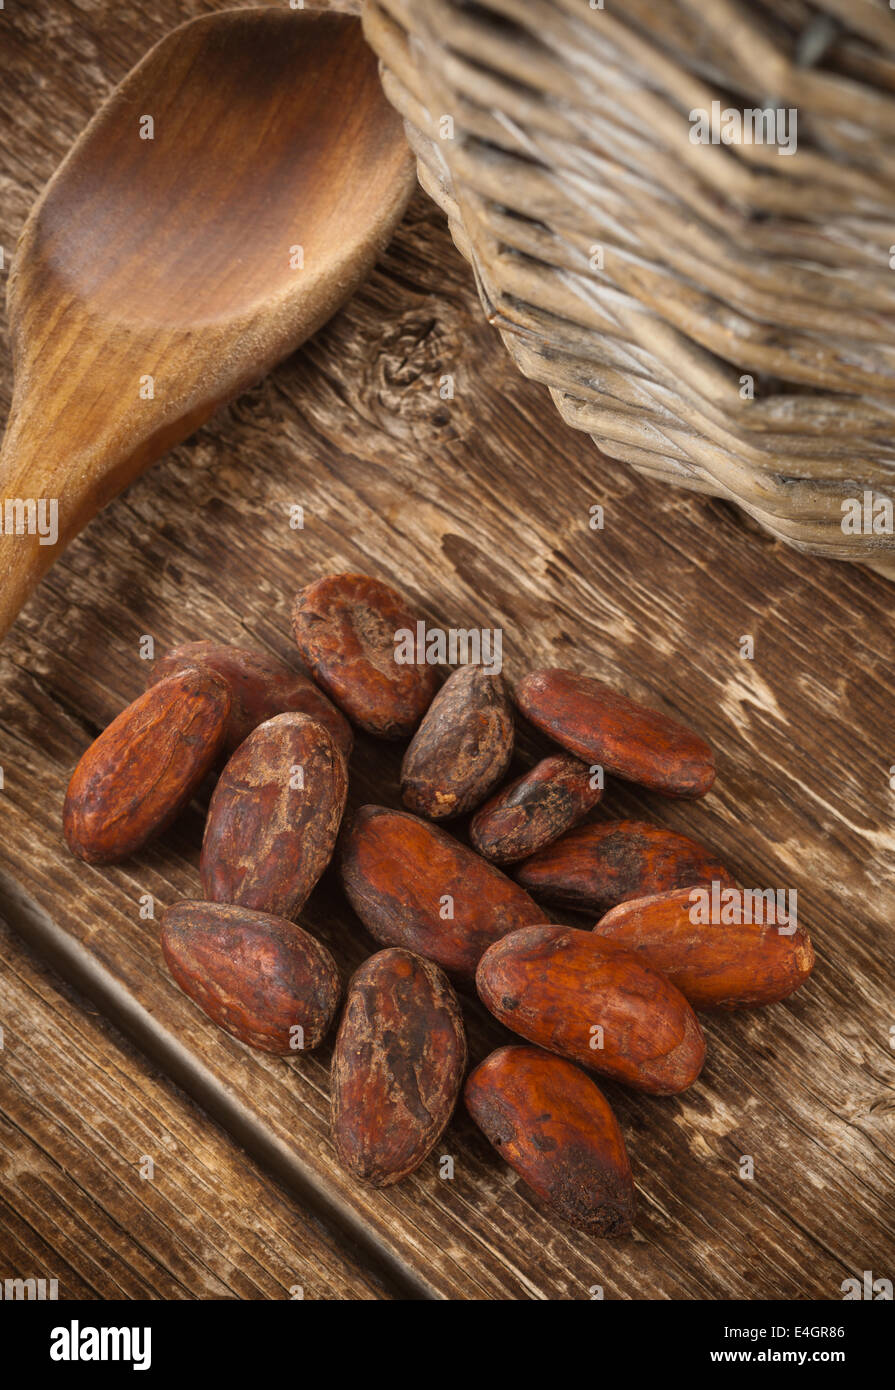 Cocoa beans on wooden table photographed with studio lighting. Stock Photo